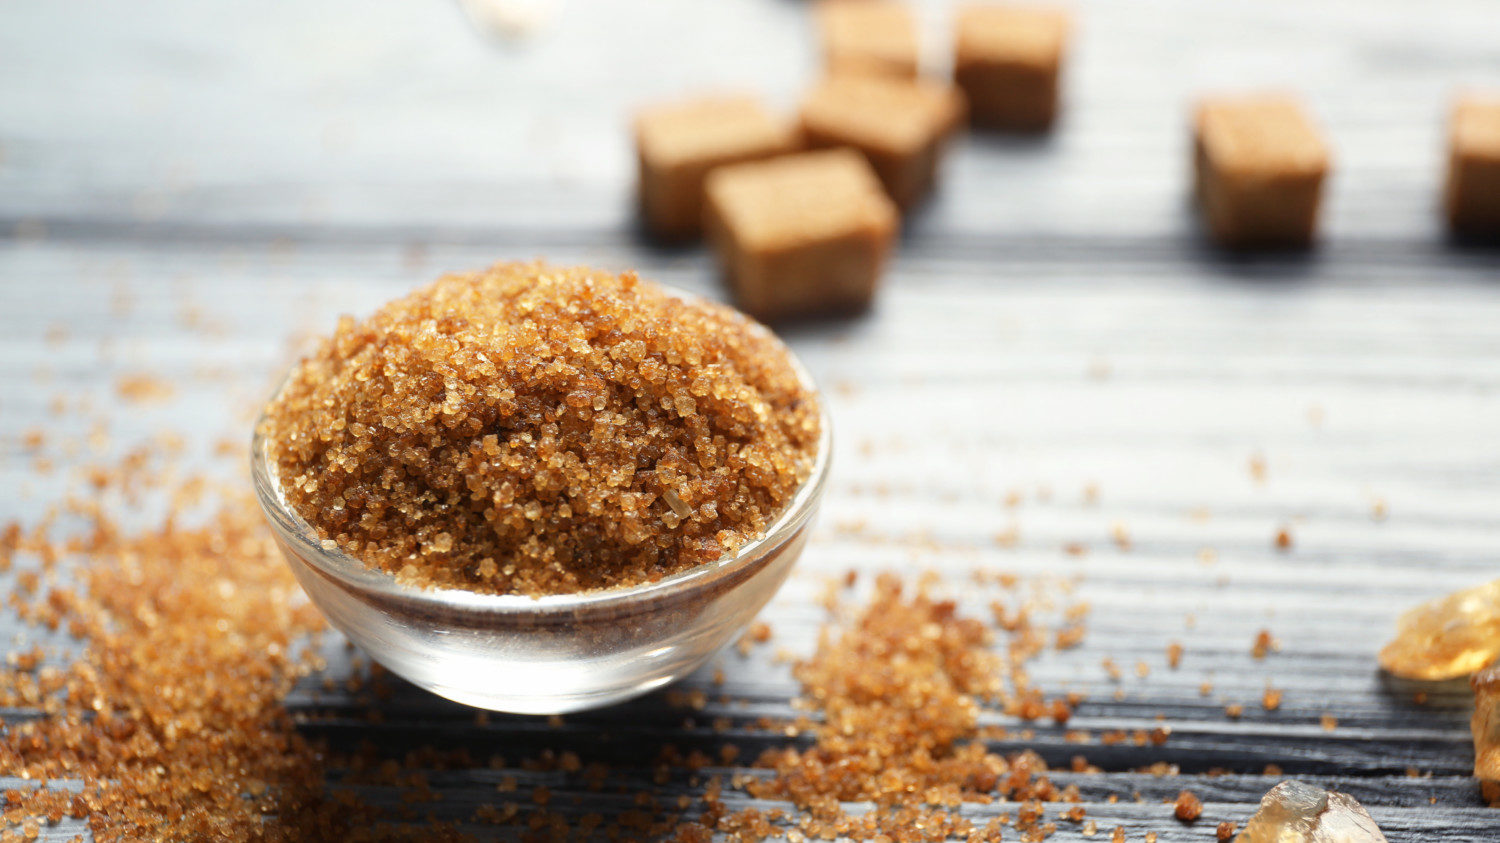 Knowing these brown sugar substitutes can save your baking in a pinch